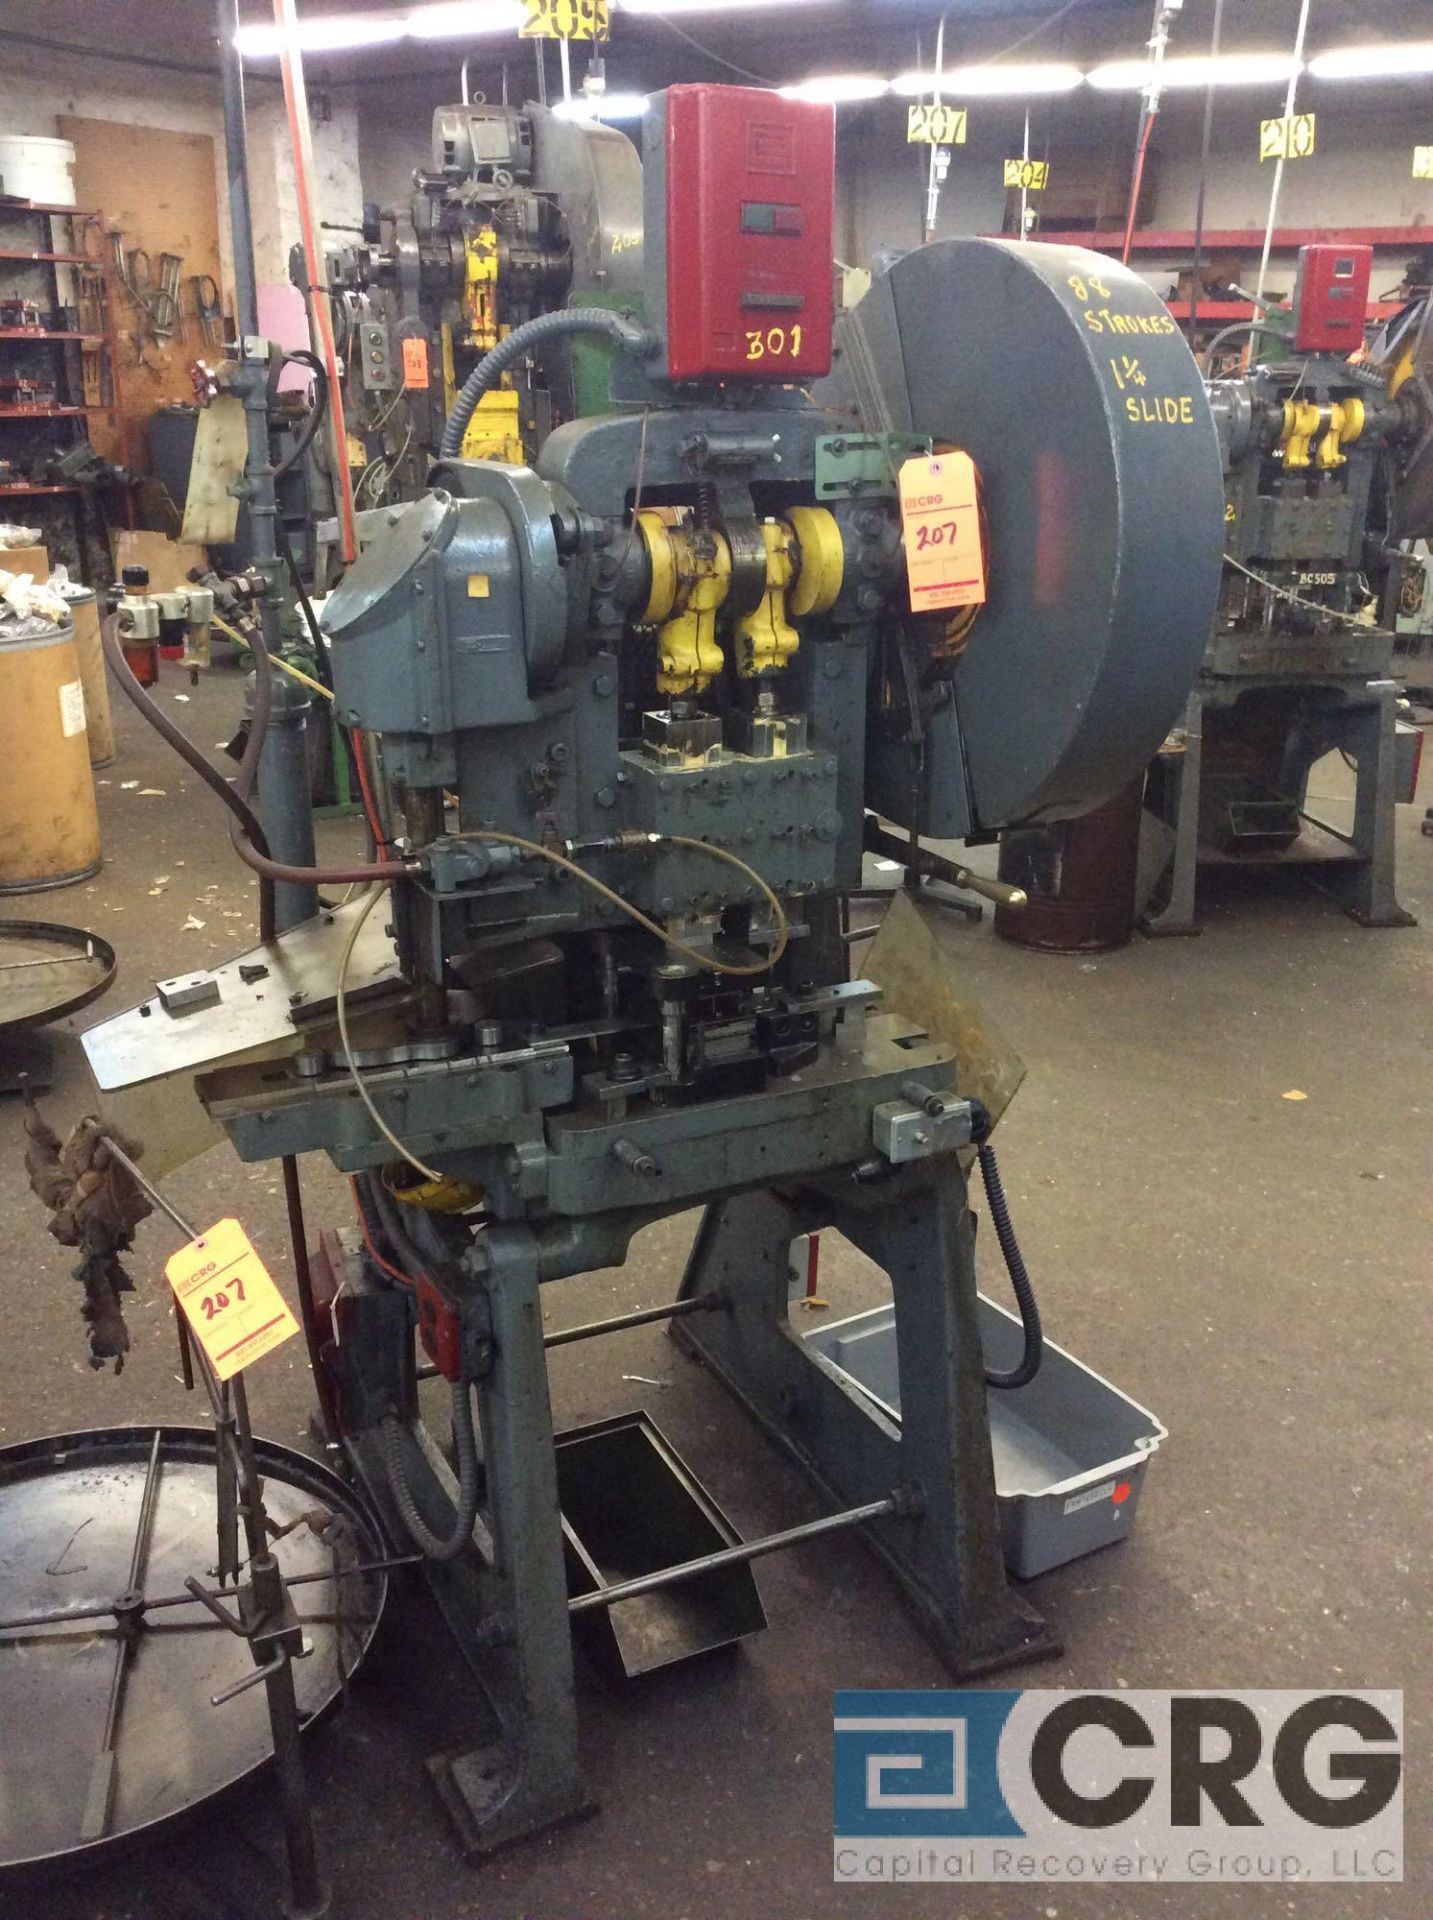 Standard Machinery m/n 7SD, punch press, 88 strokes per minute, flywheel at 1 1/4 inch (LOCATED ON